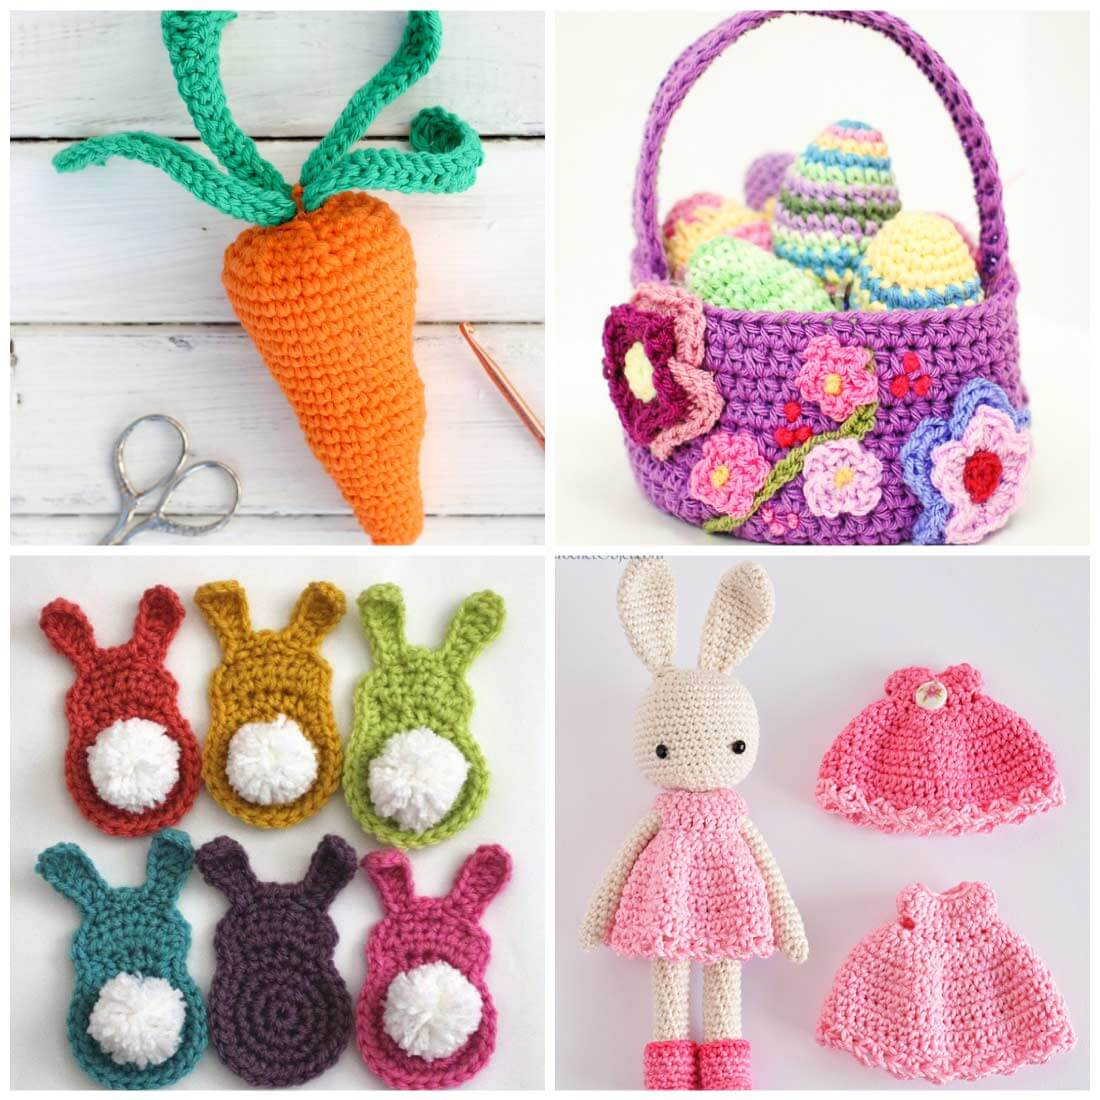 Free Easter Crochet Patterns 16 Free Crochet Patterns For Easter Daisy Cottage Designs